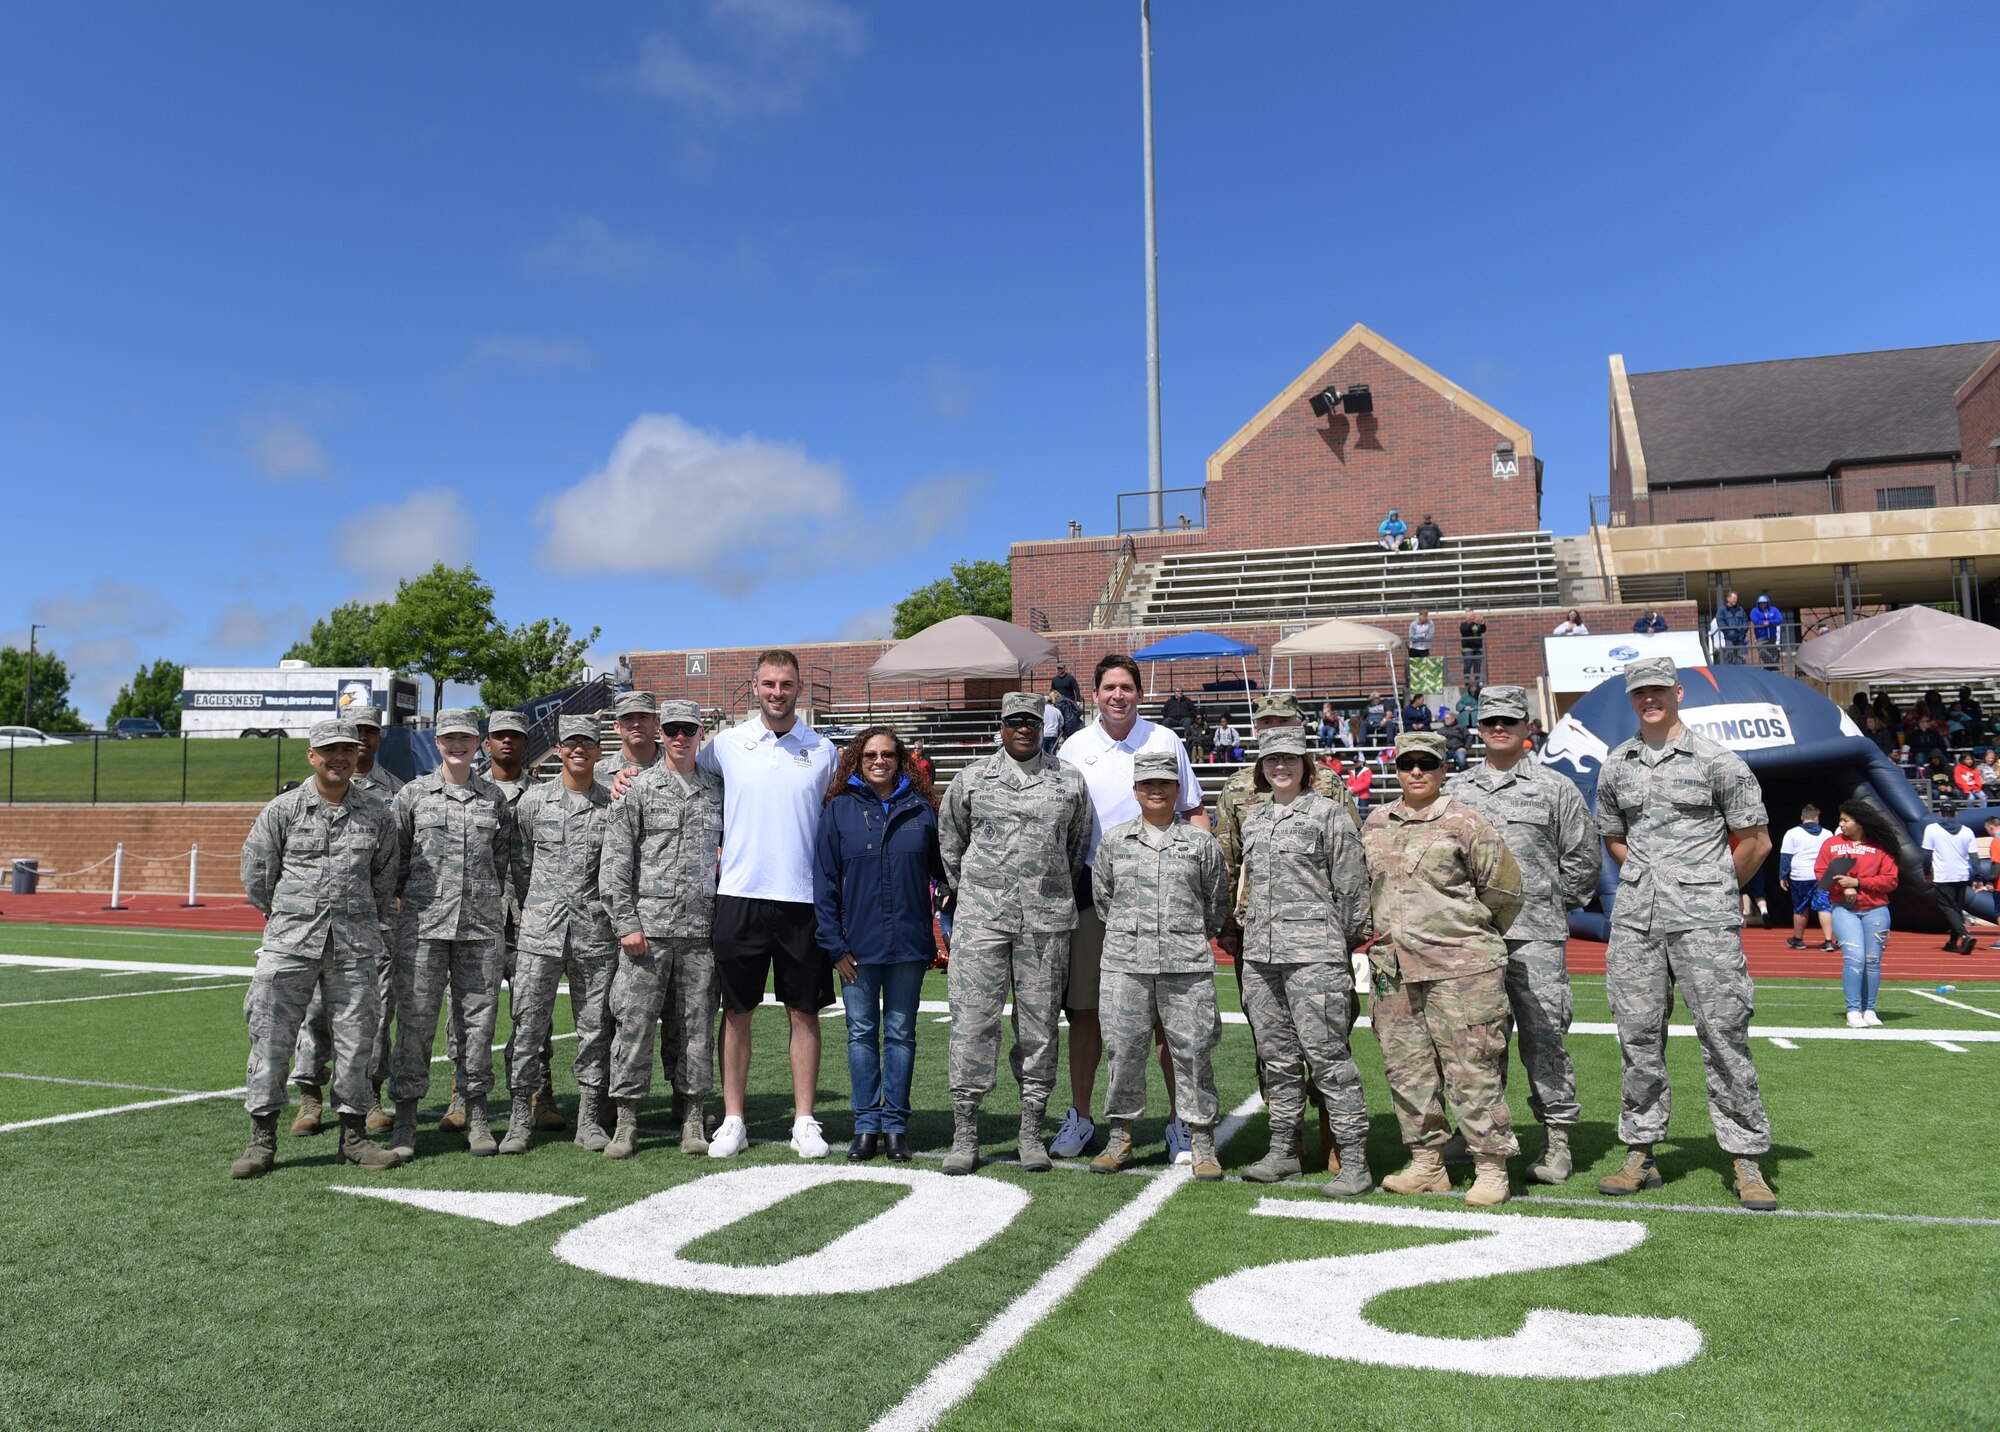 Members of Team Buckley pose for a group photo with National Football League players following the 10th annual Dare to Play football event June 22, 2019, in Highlands Ranch, Colorado.